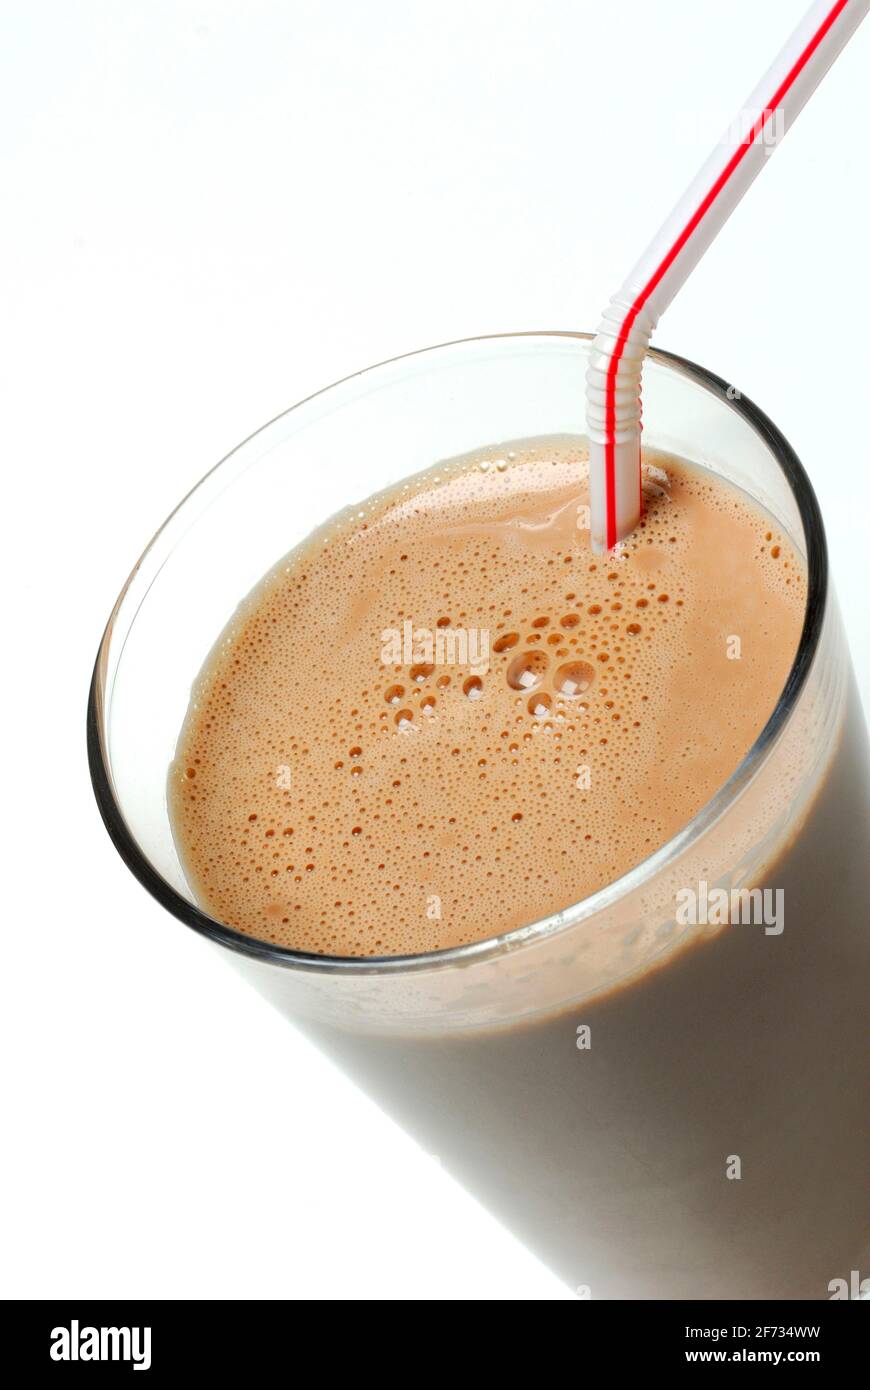 Cocoa, glass of drinking chocolate with straw, cocoa drink, dairy products, chocolate Stock Photo